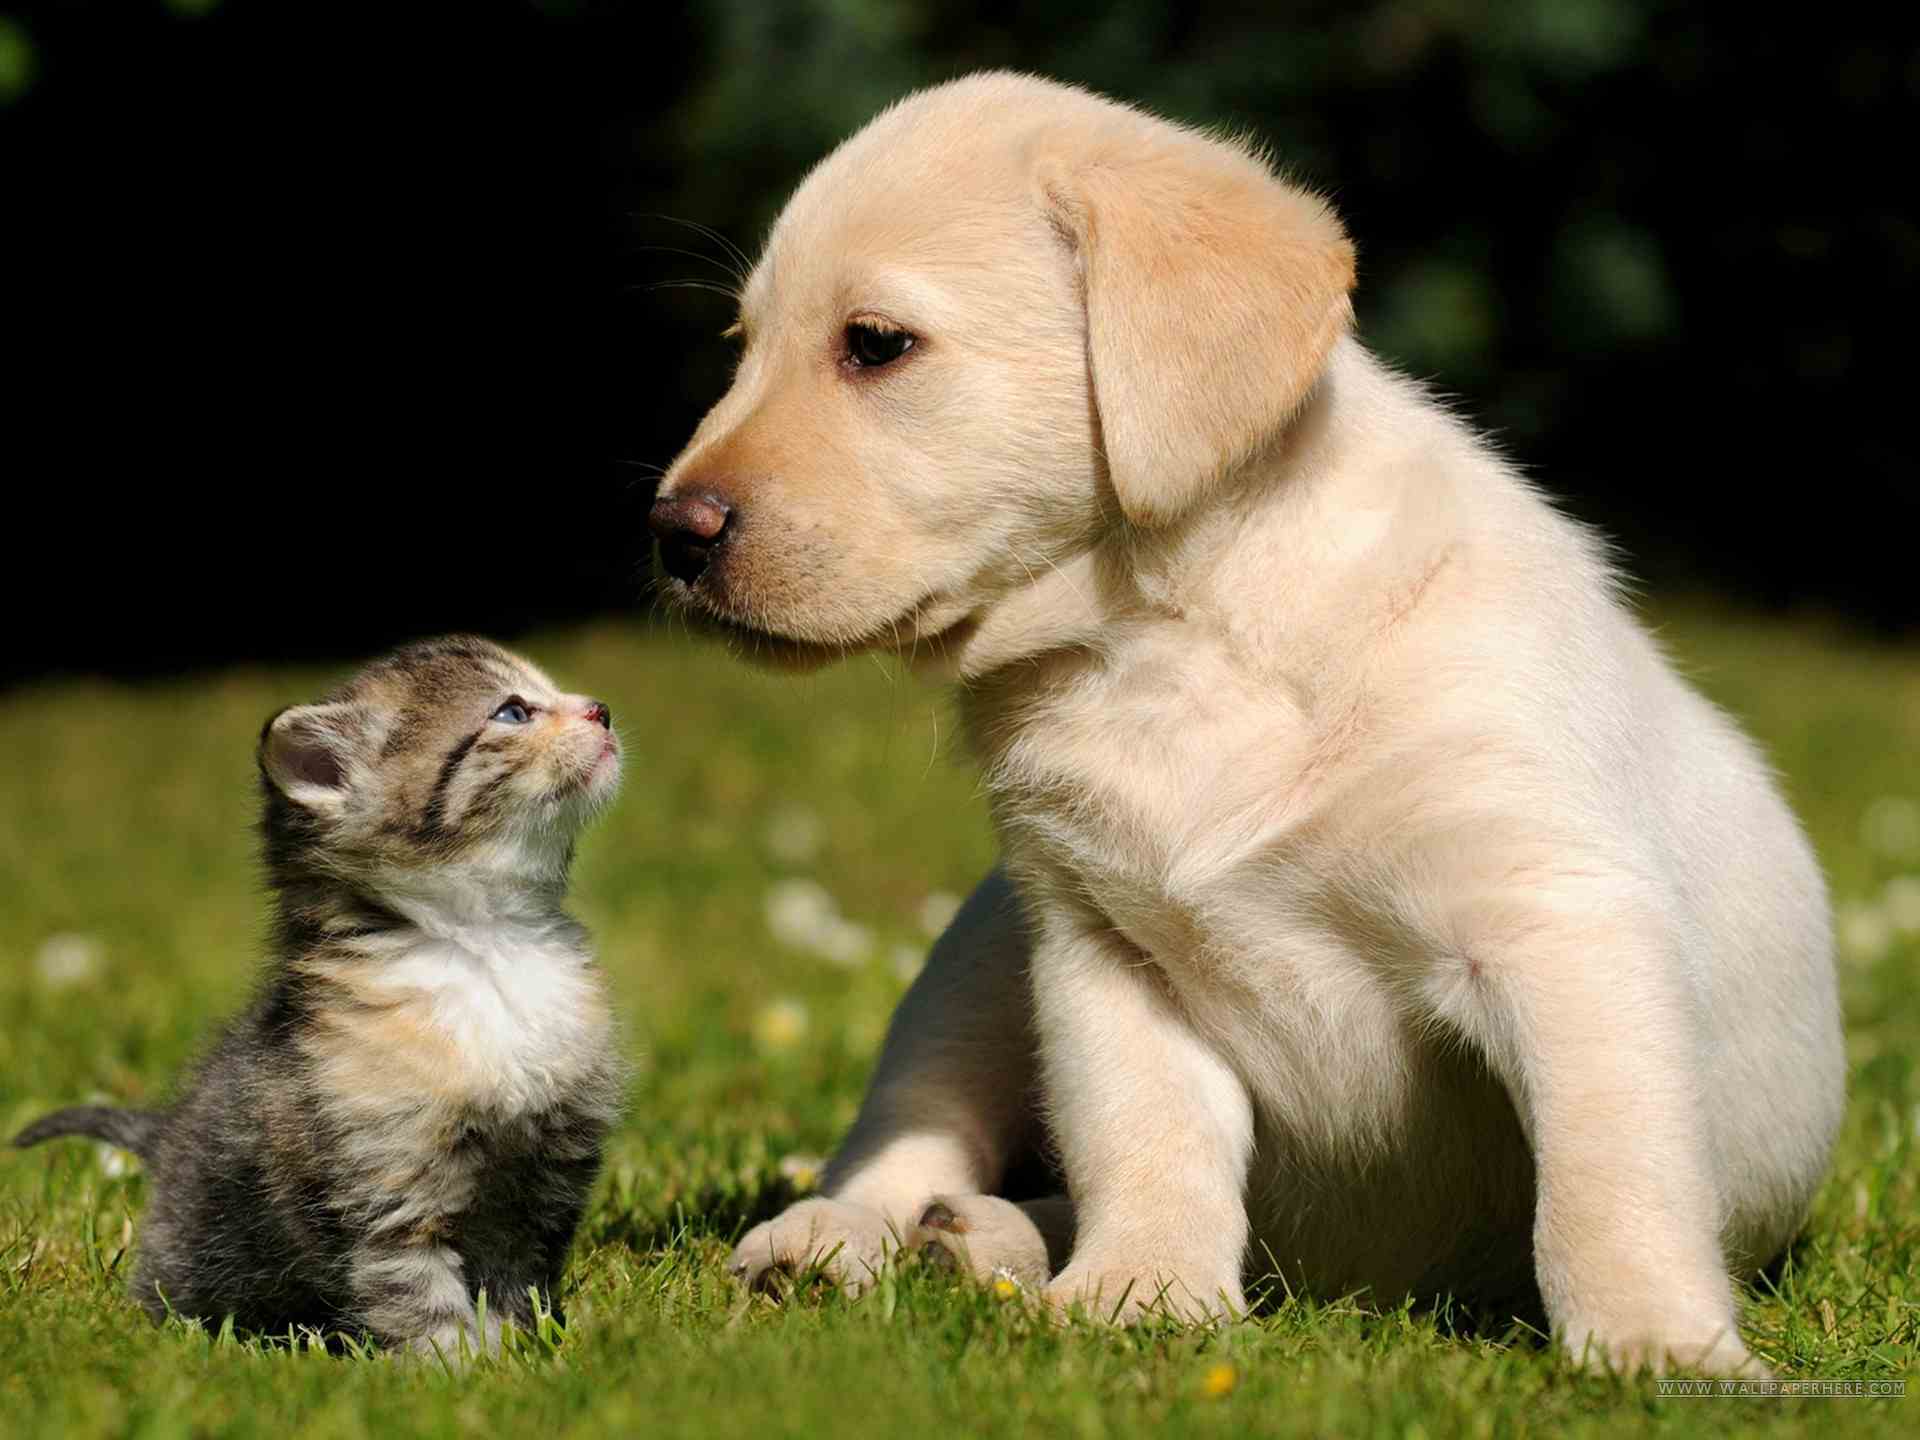 Cat and dog wallpaper download